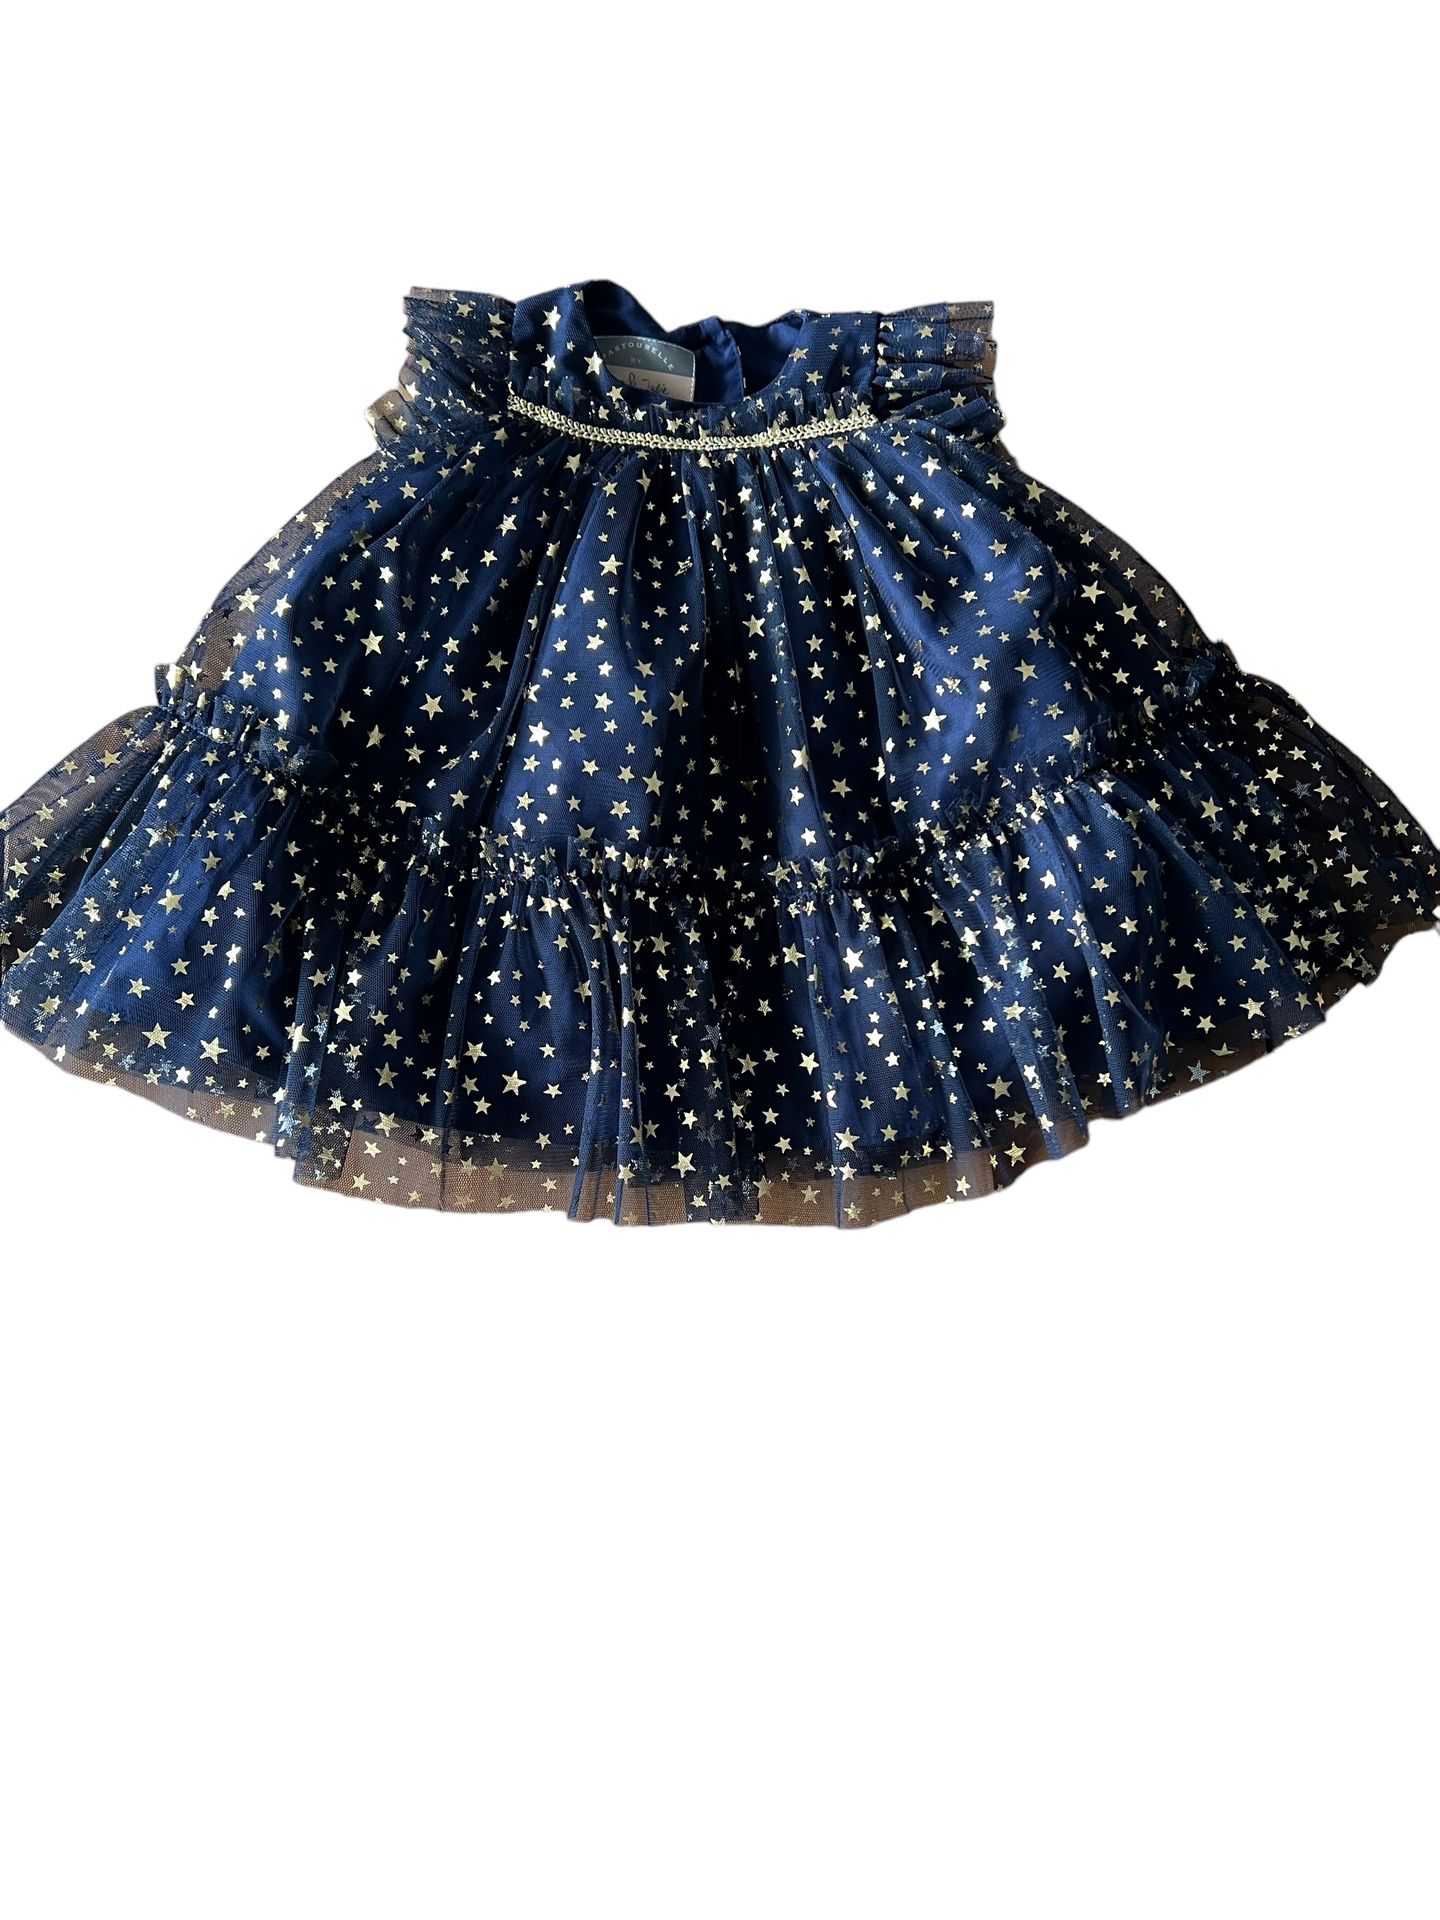 Pippa & Julie Blue & Gold Star Net Dress & Bottoms Retail 6-9 Months.  Comes from a pet and smoke free household  Beautiful dress gorgeous it has tull